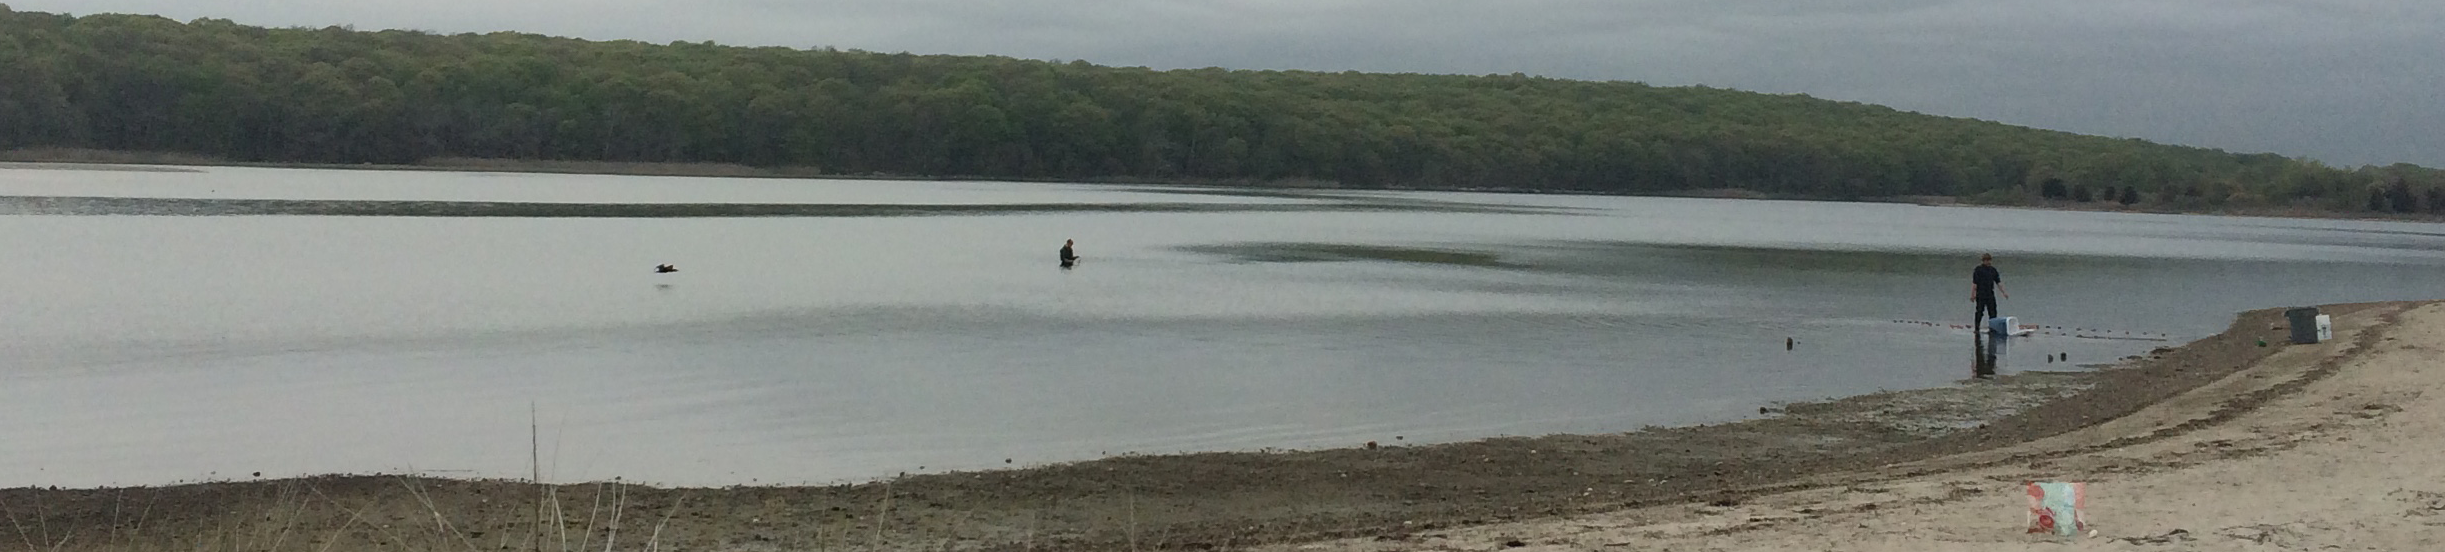 Seining and water sampling in Mumford Cove, CT